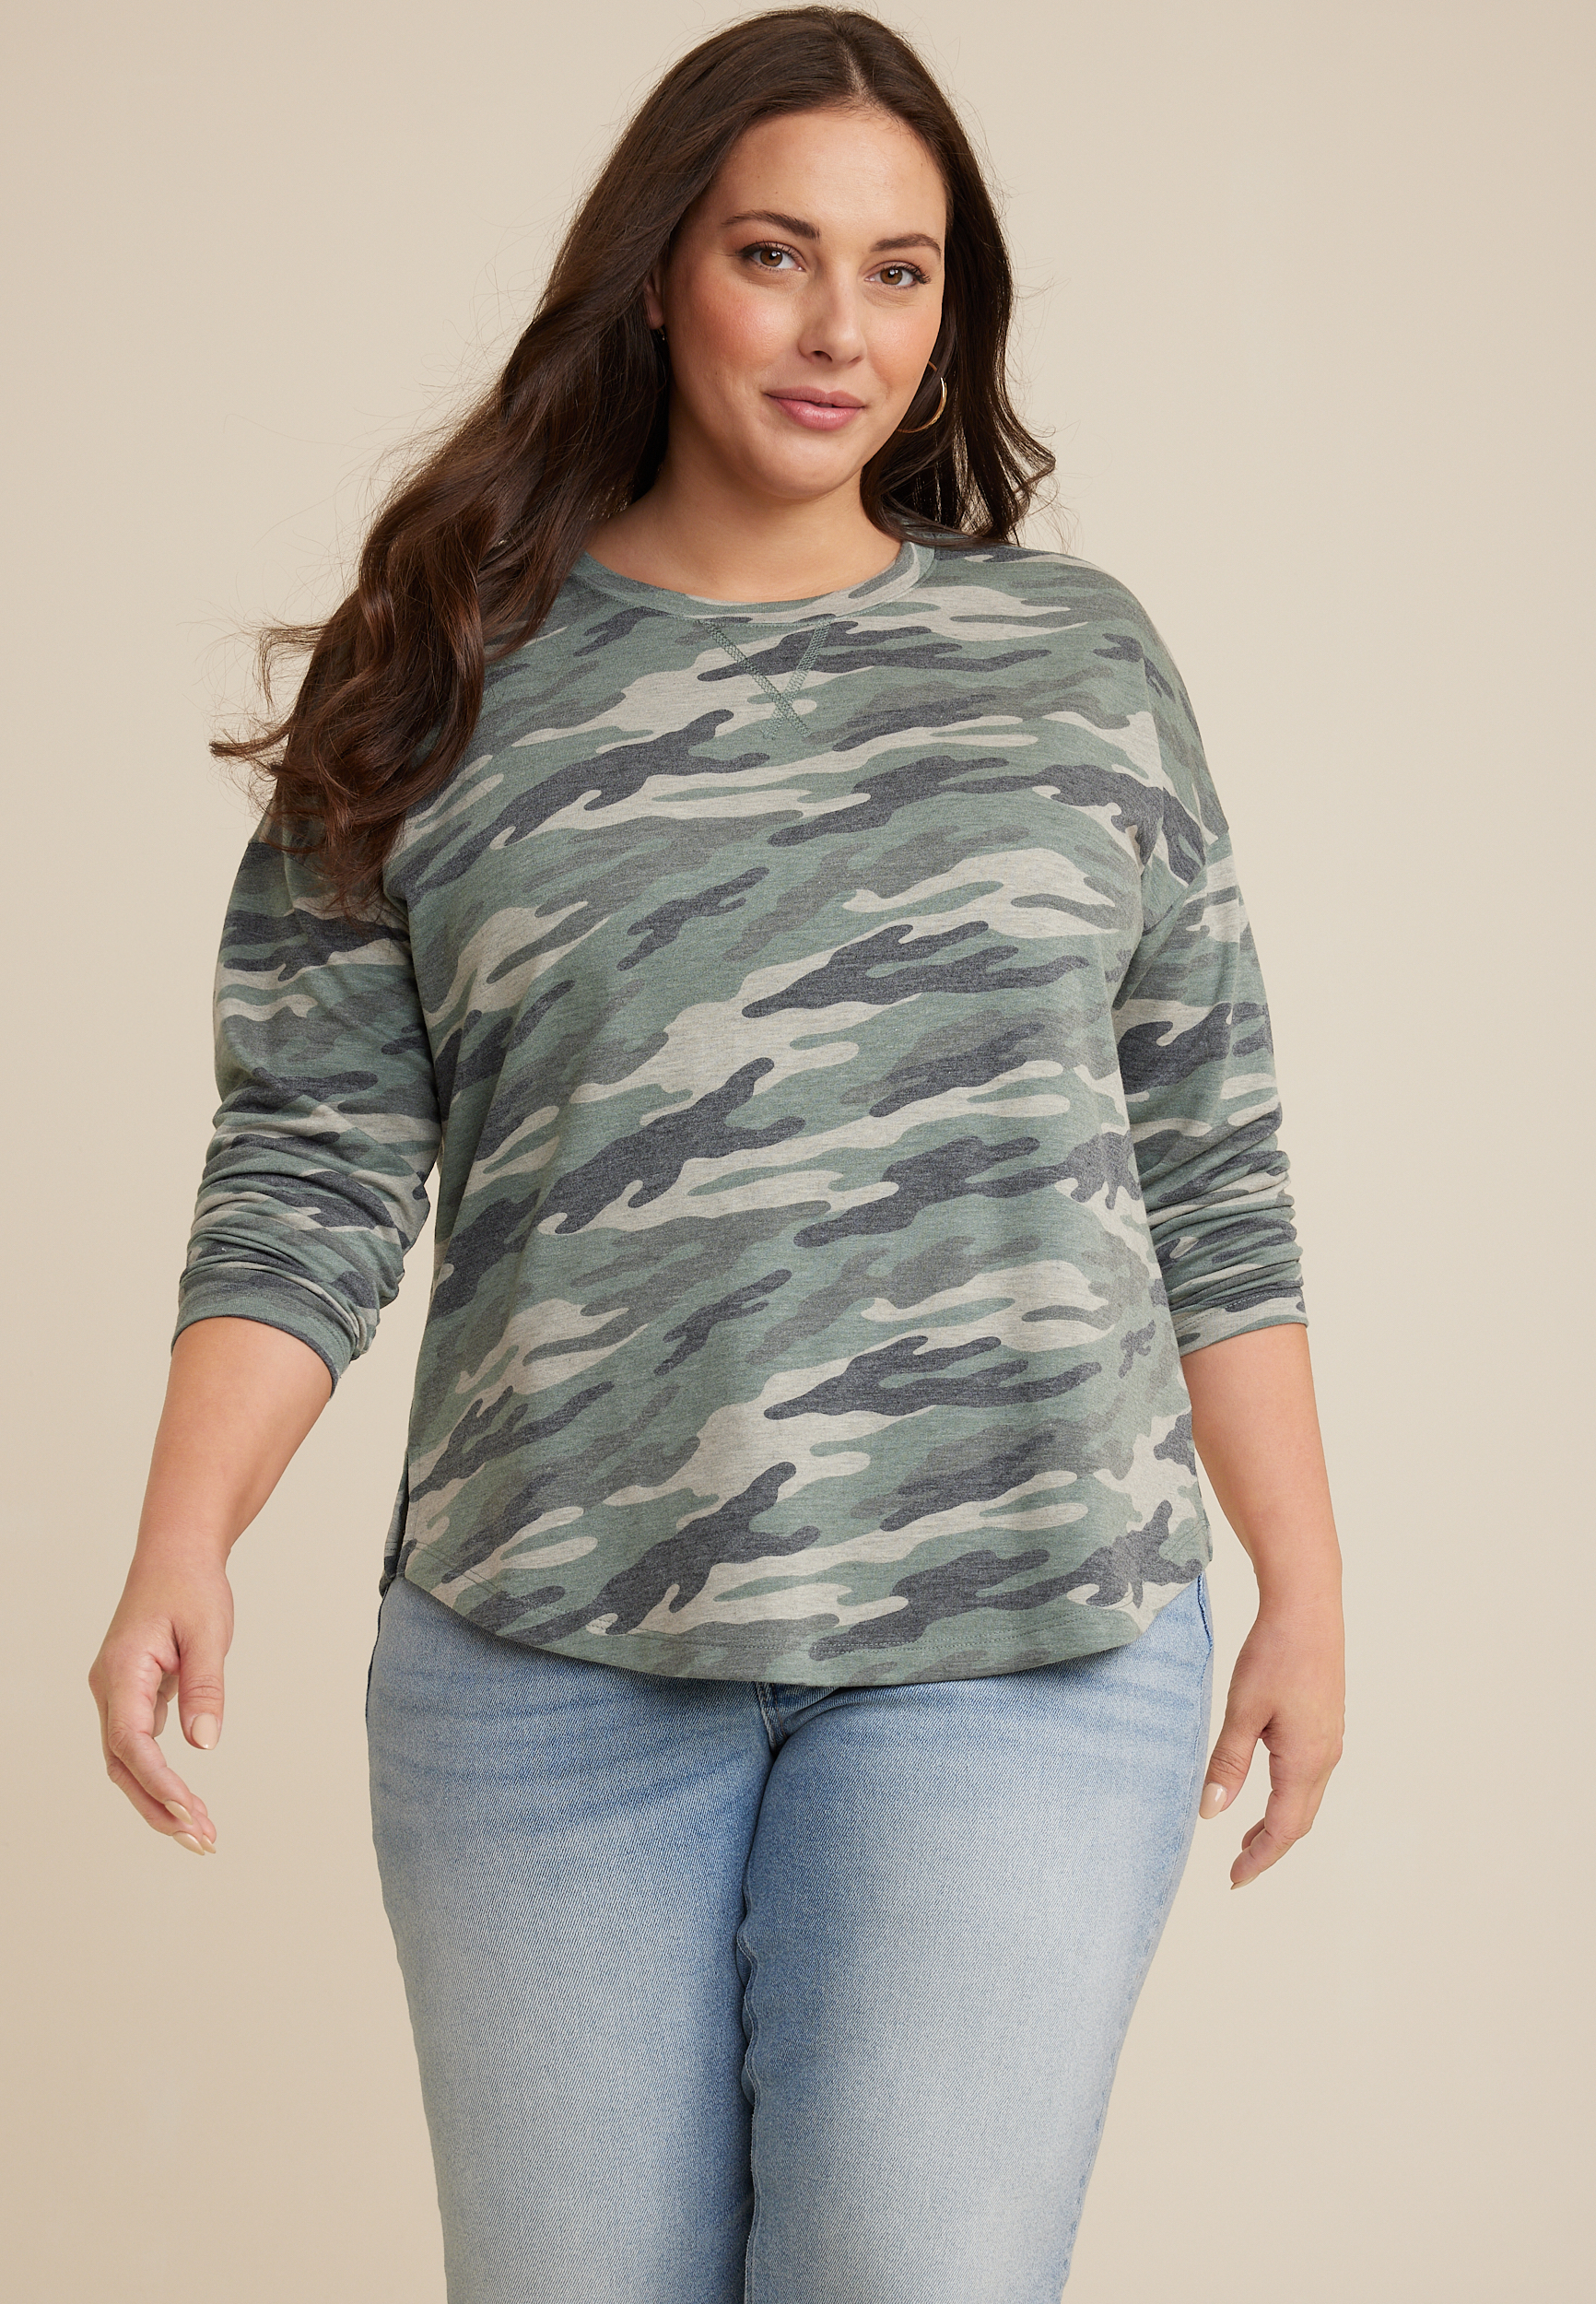 Lucky Brand Plus Size Feminine Top, Tops, Clothing & Accessories